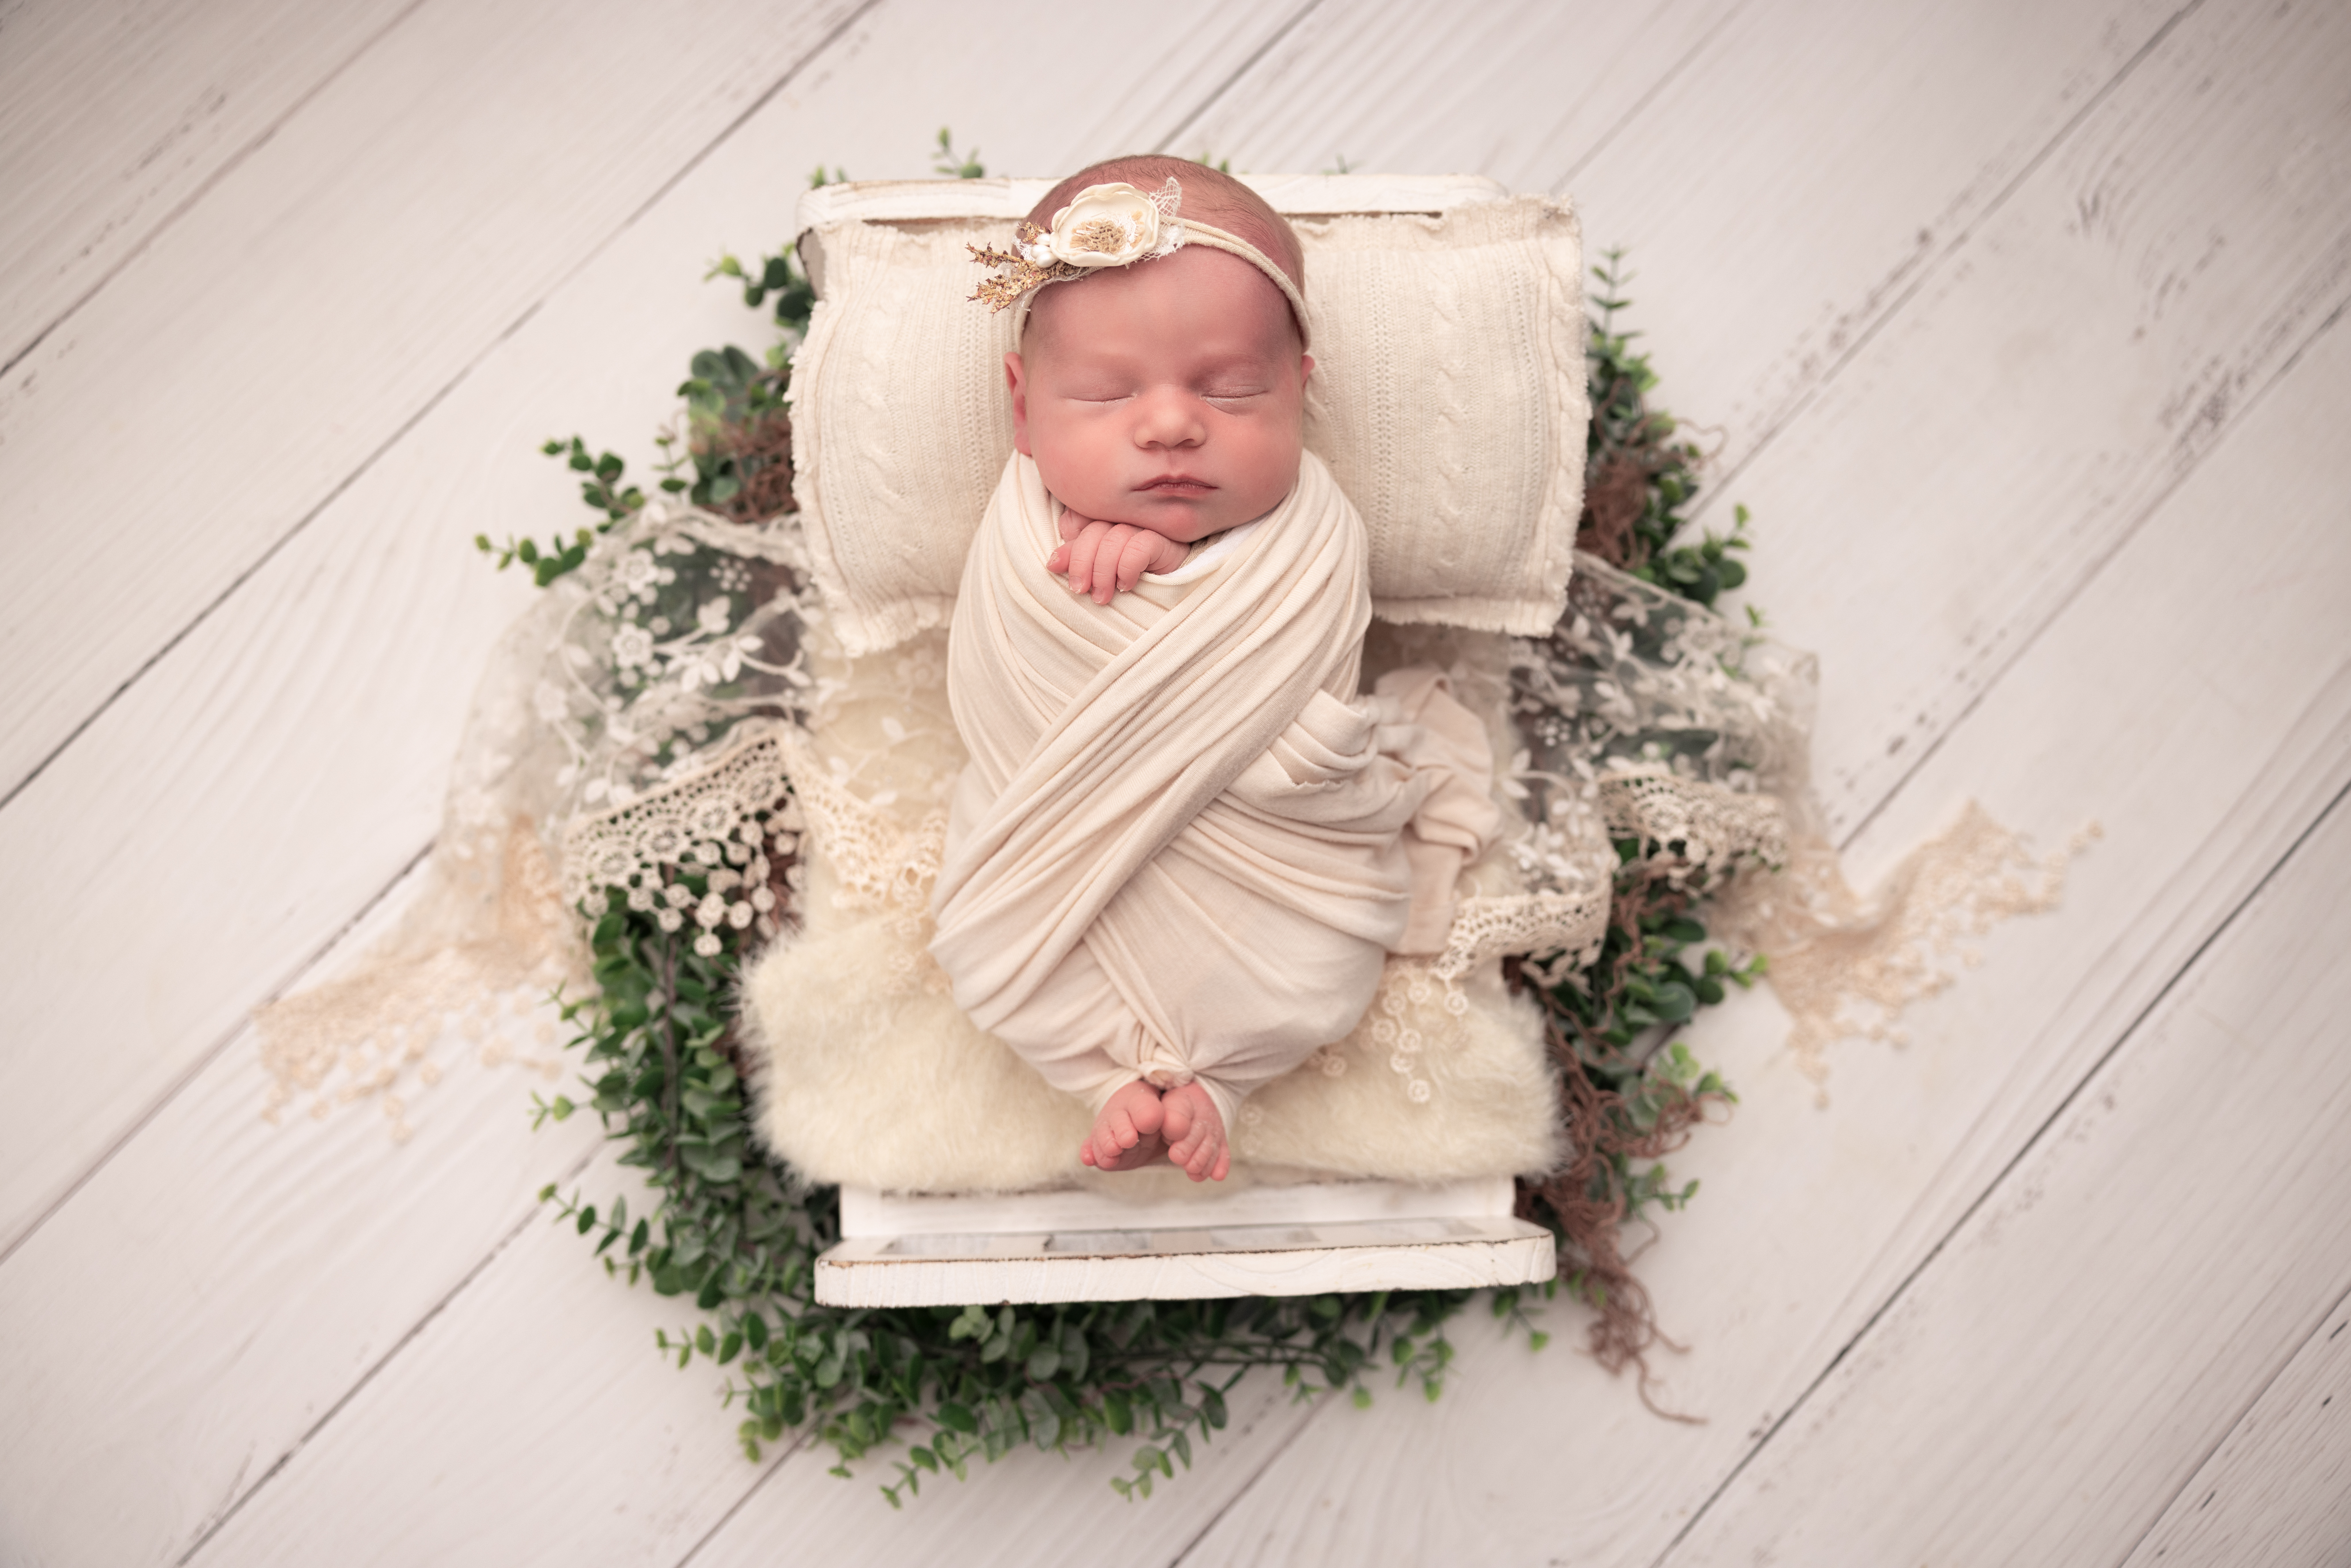 Baby girl wrapped in a cream wrap with her toes poking out lying in a baby bed with greenery